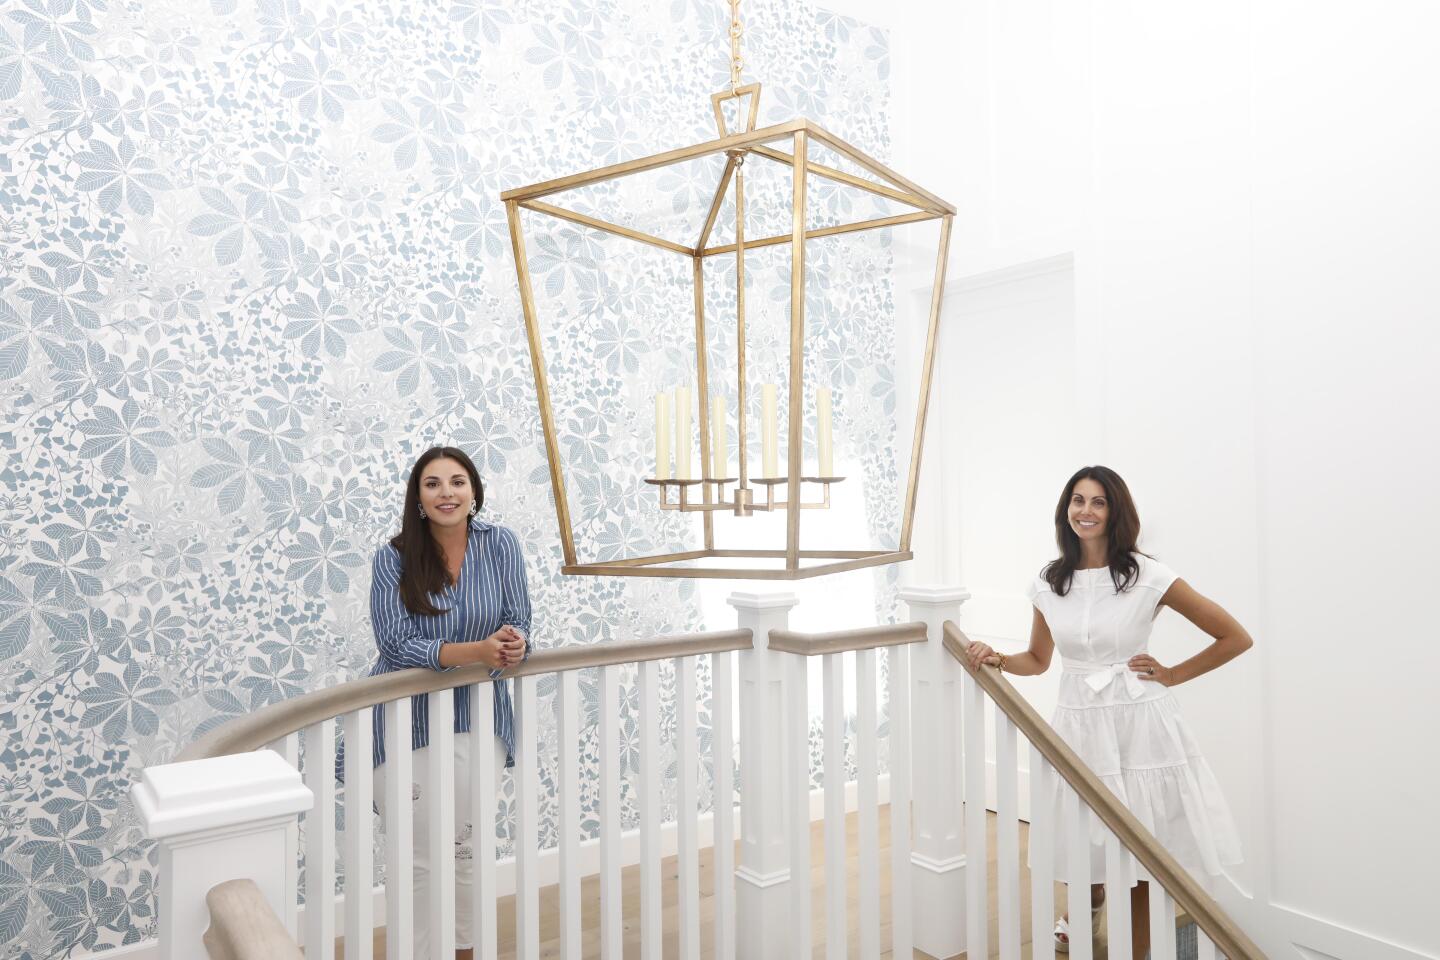 Victoria Aveyard, author of the young adult fantasy series, "Red Queen," left, and interior decorator Christine Markatos Lowe, who helped her create young, feminine interiors with pastel colors, whimsical wallpapers and eclectic furnishings.